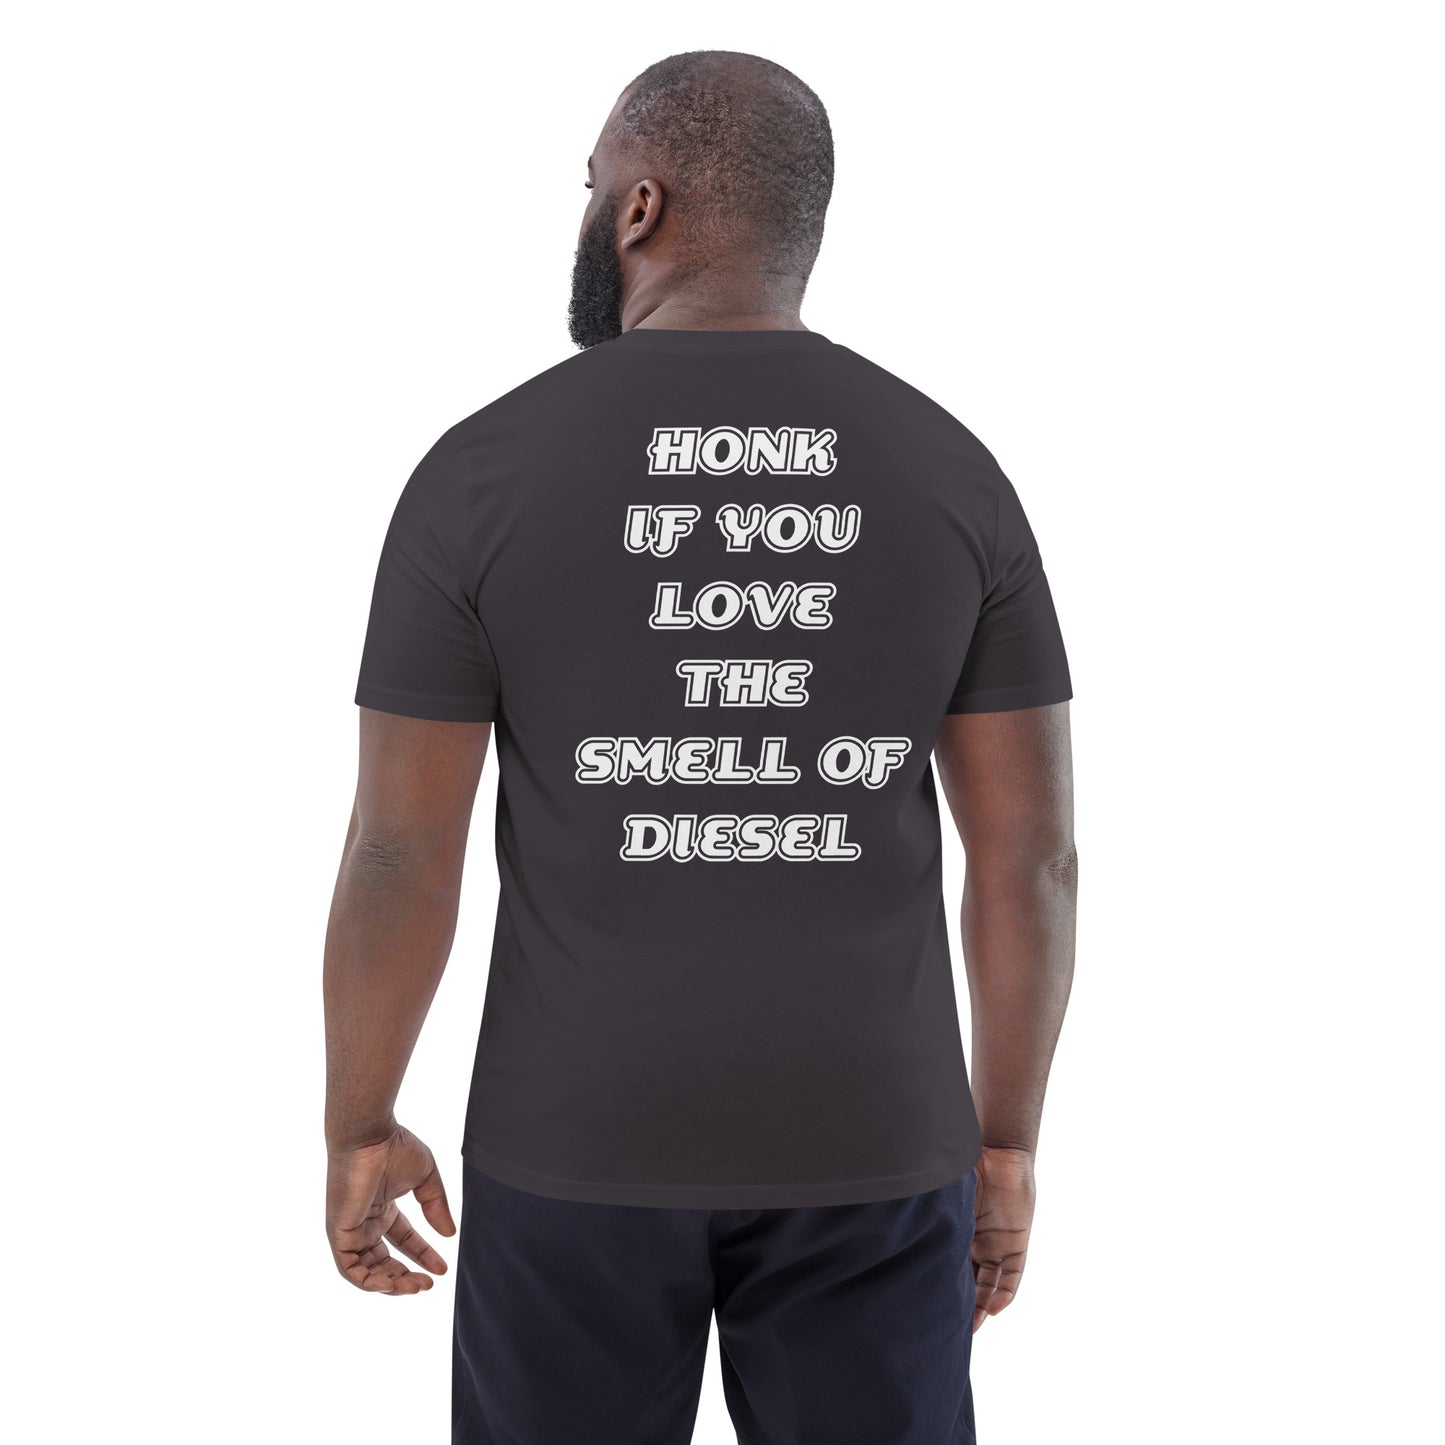 HONK IF YOU LOVE THE SMELL OF DIESEL cotton t-shirt